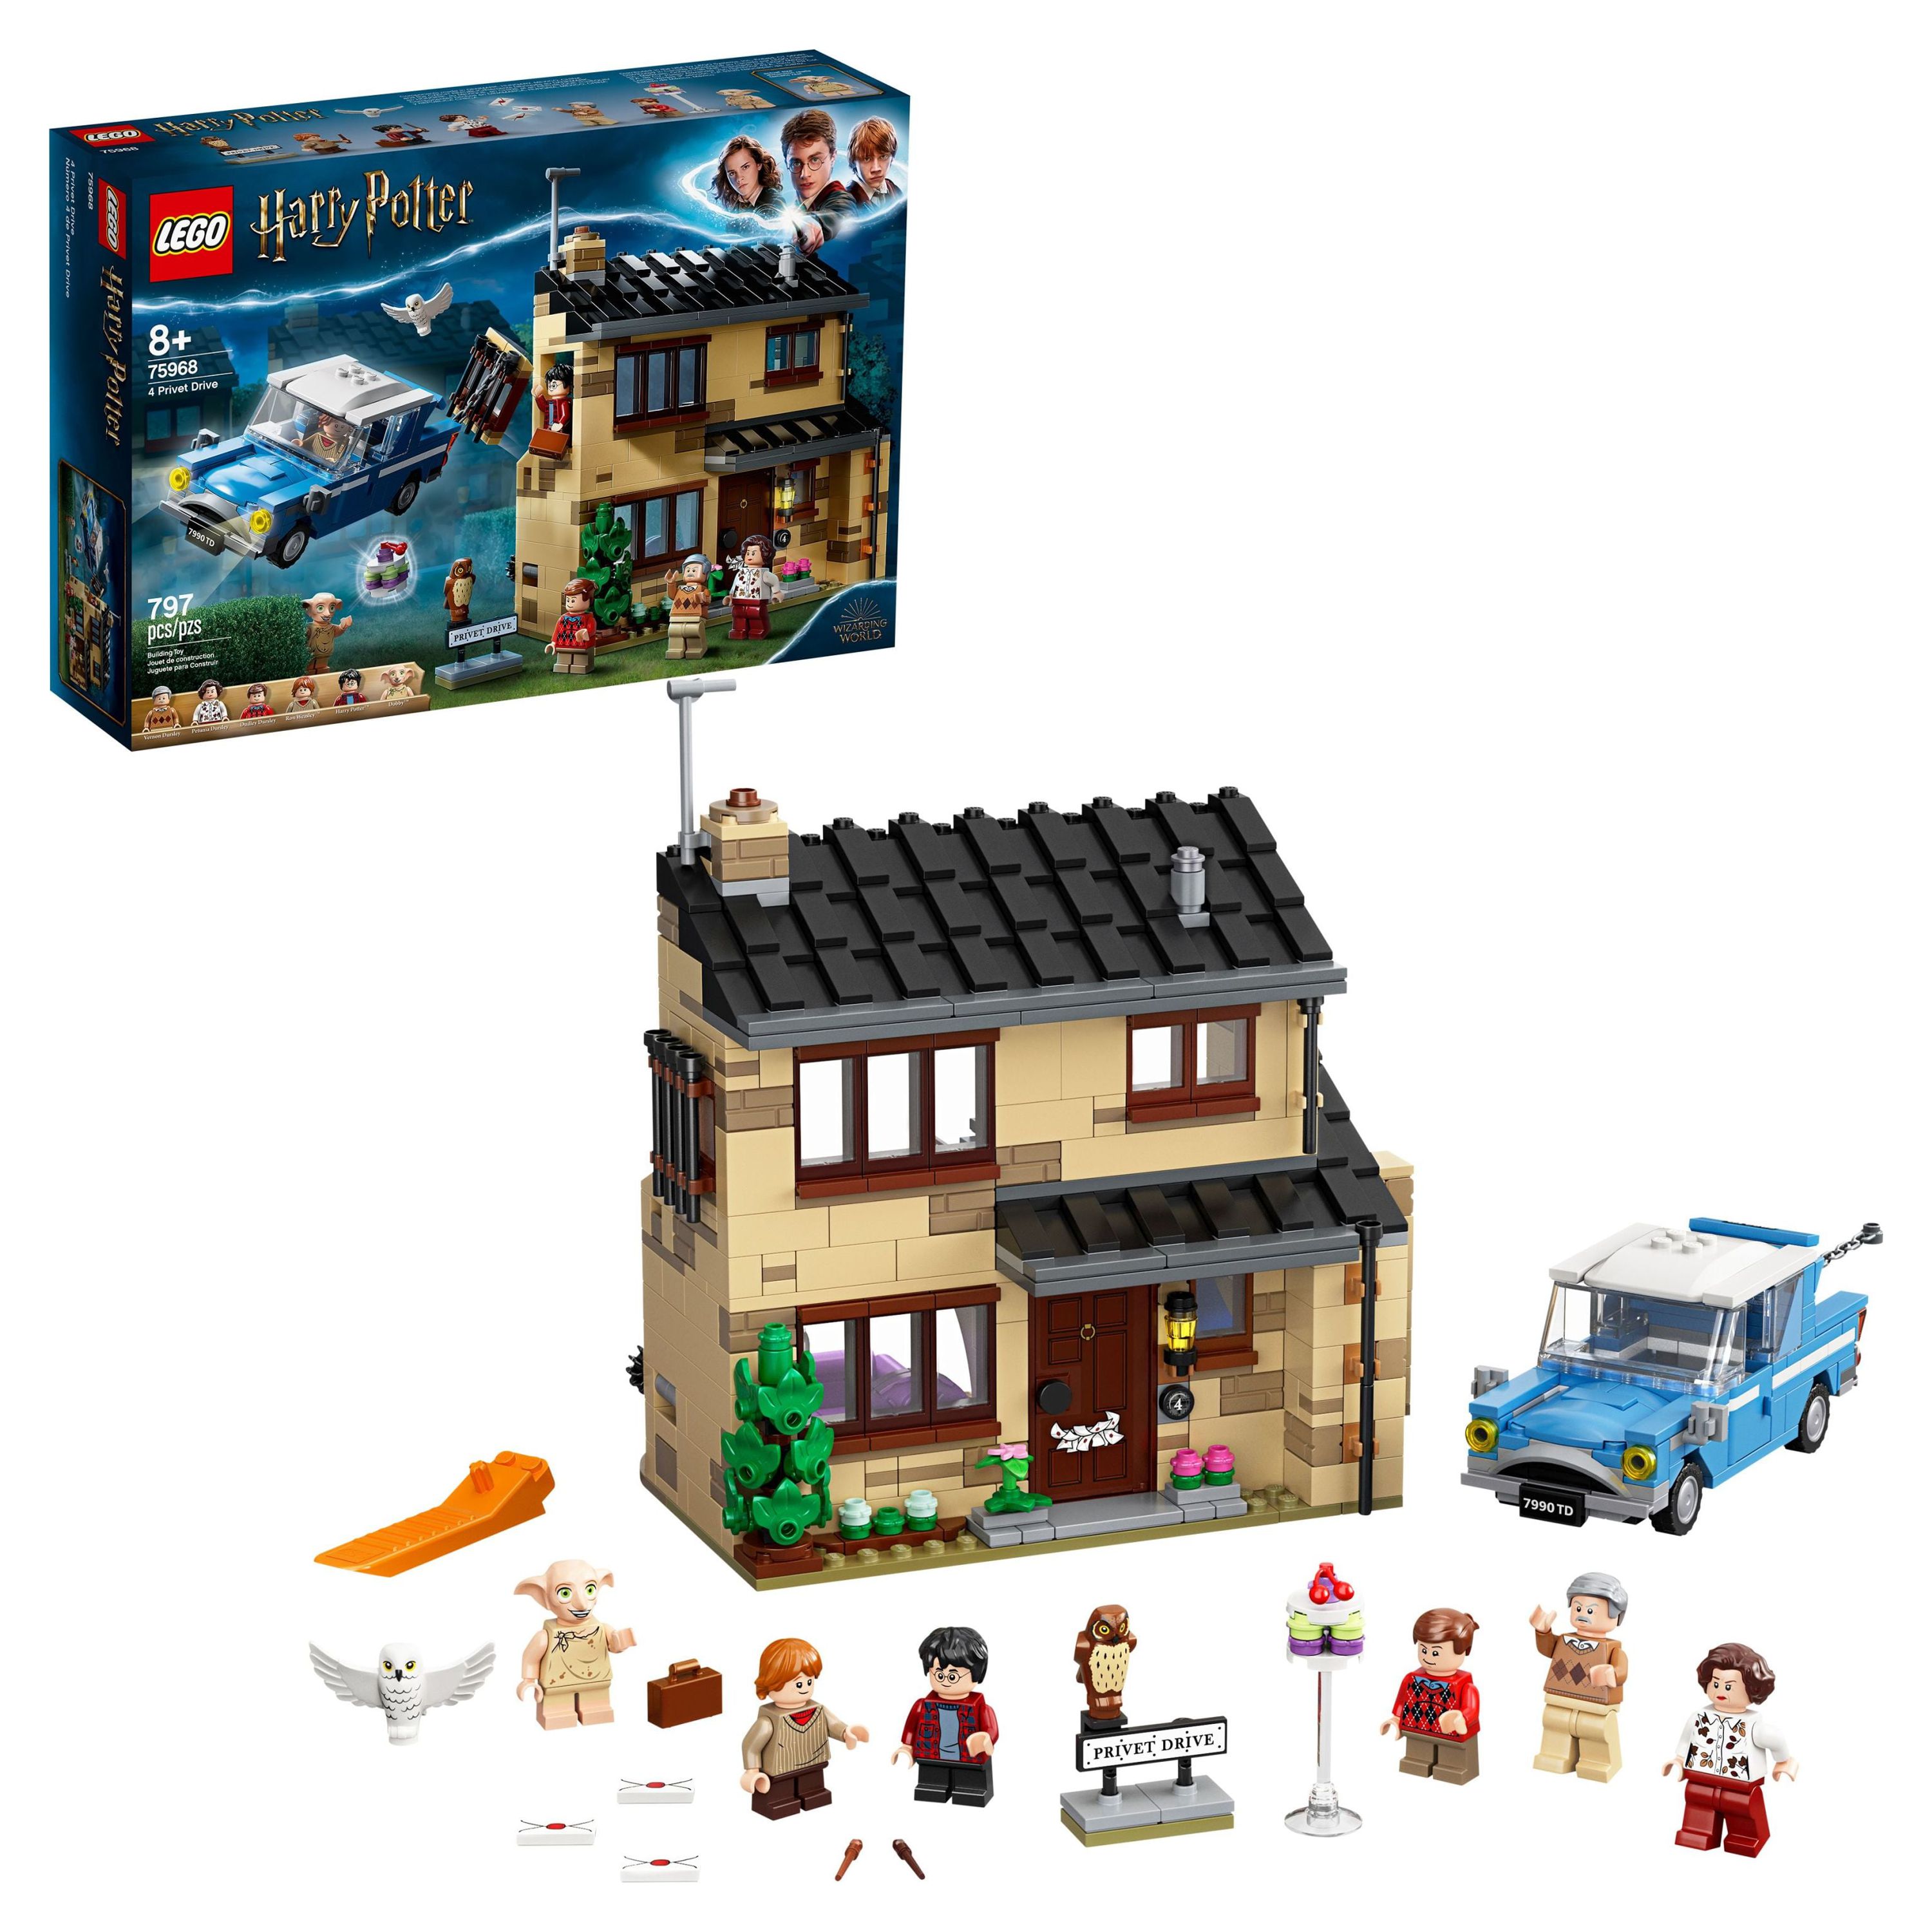 LEGO Harry Potter 4 Privet Drive 75968 House and Ford Anglia Flying Car Toy, Wizarding World Gifts for Kids, Girls & Boys with Harry Potter, Ron Weasley, Dursley Family, and Dobby Minifigures - image 1 of 3